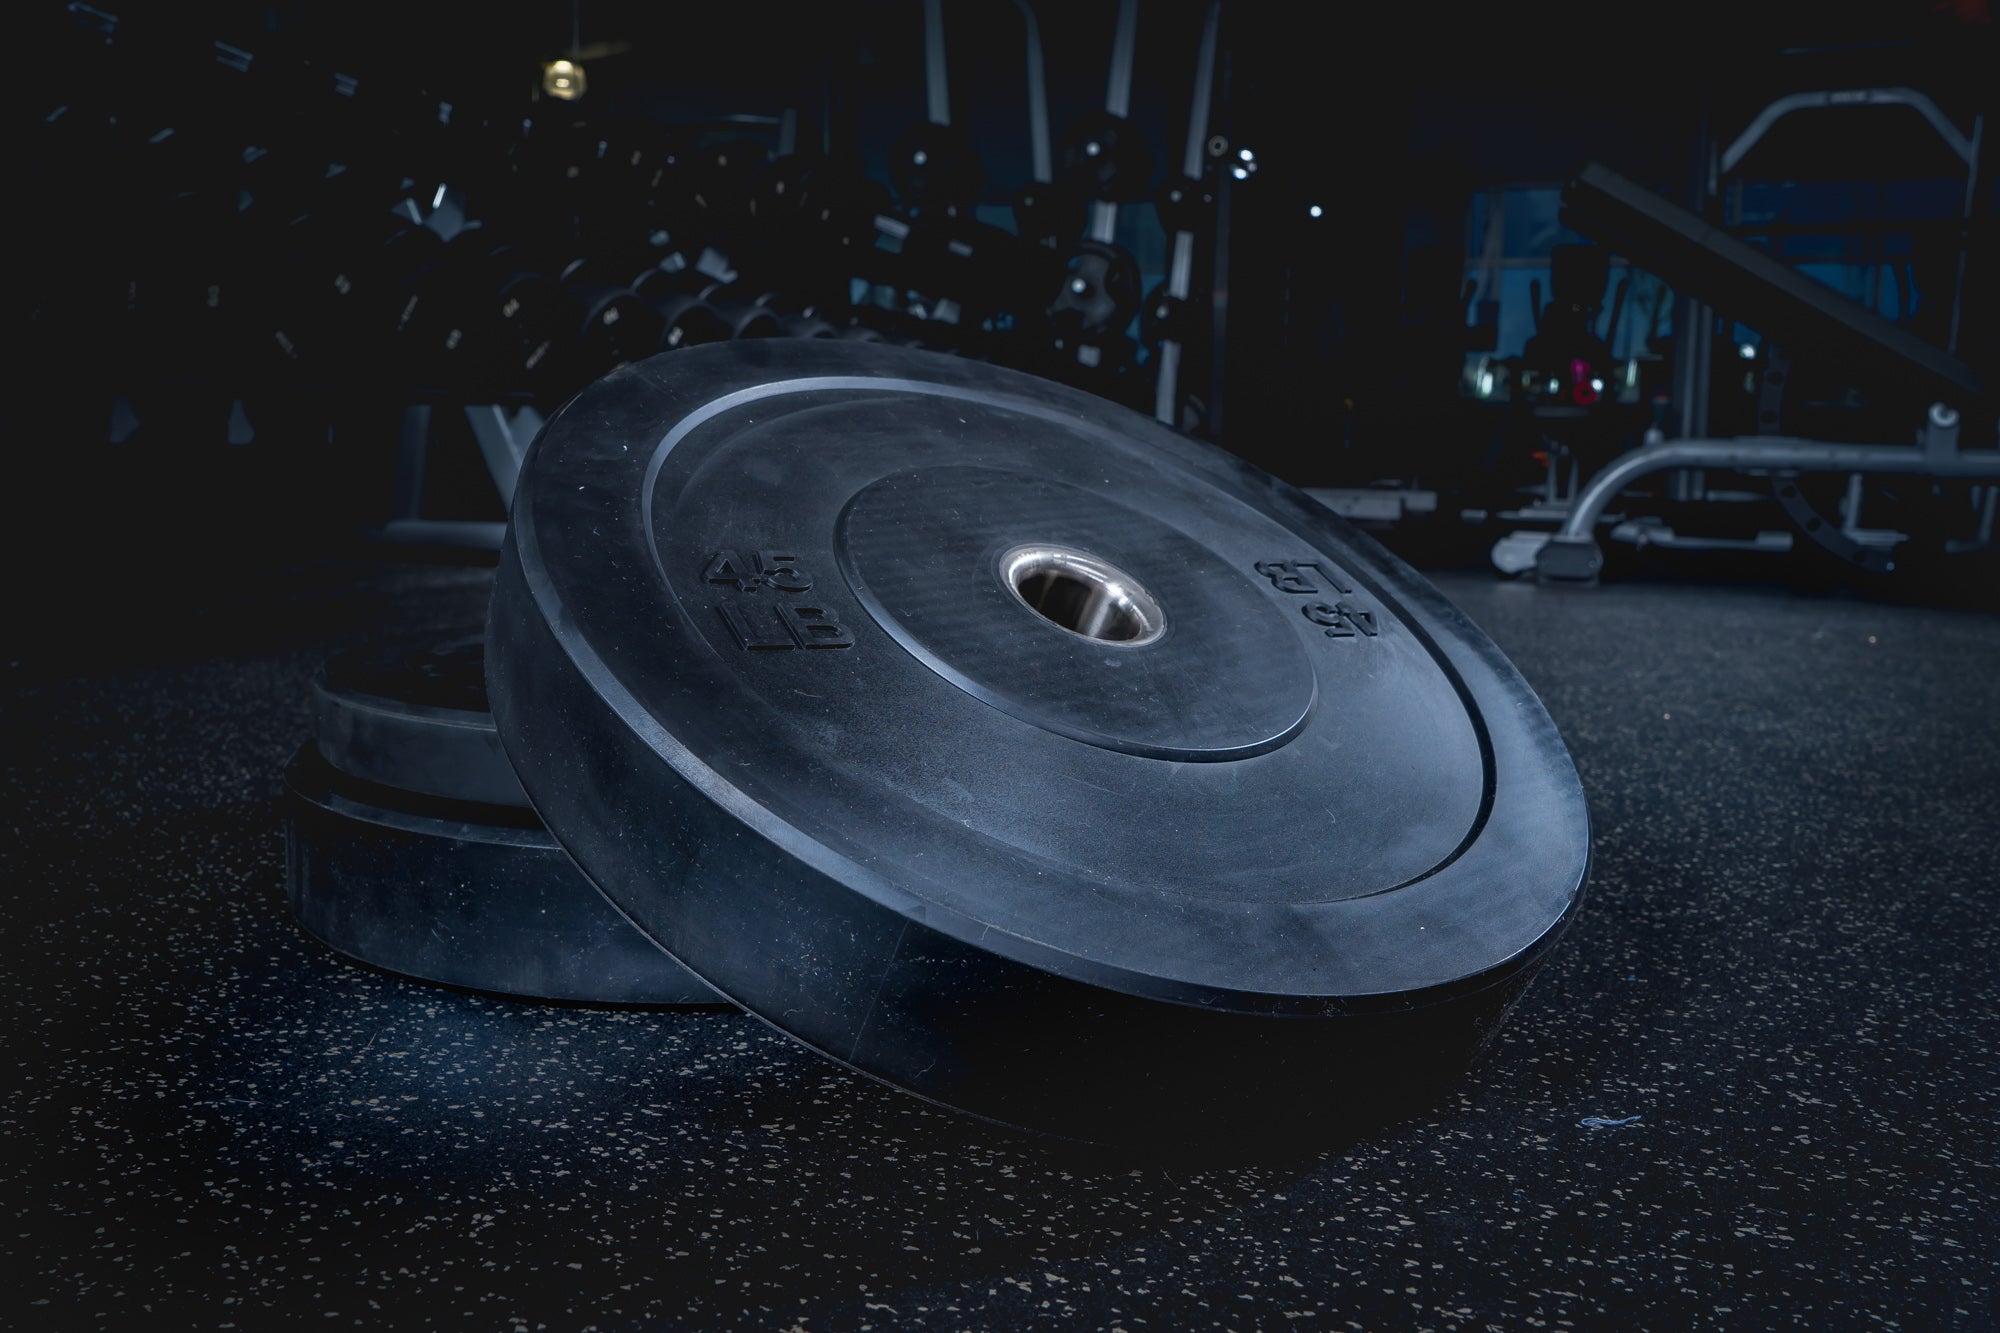 How To Shop For Bumper Plates For Your Home Gym?